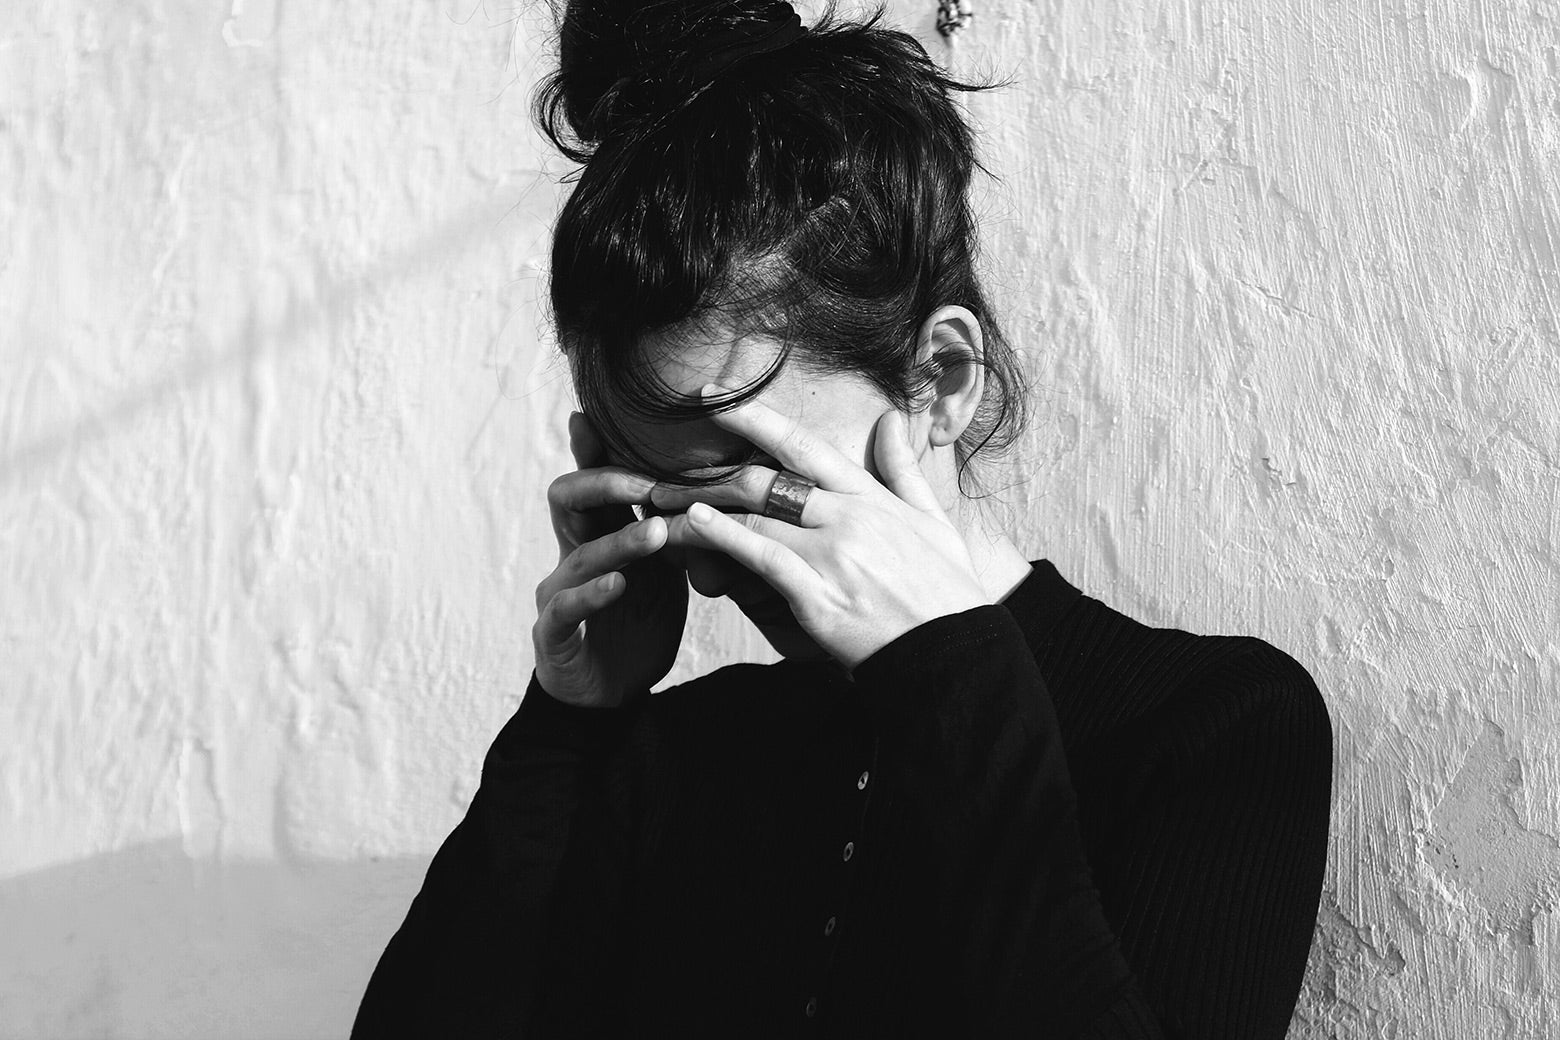 Black and white photo of a woman covering her face as if in despair